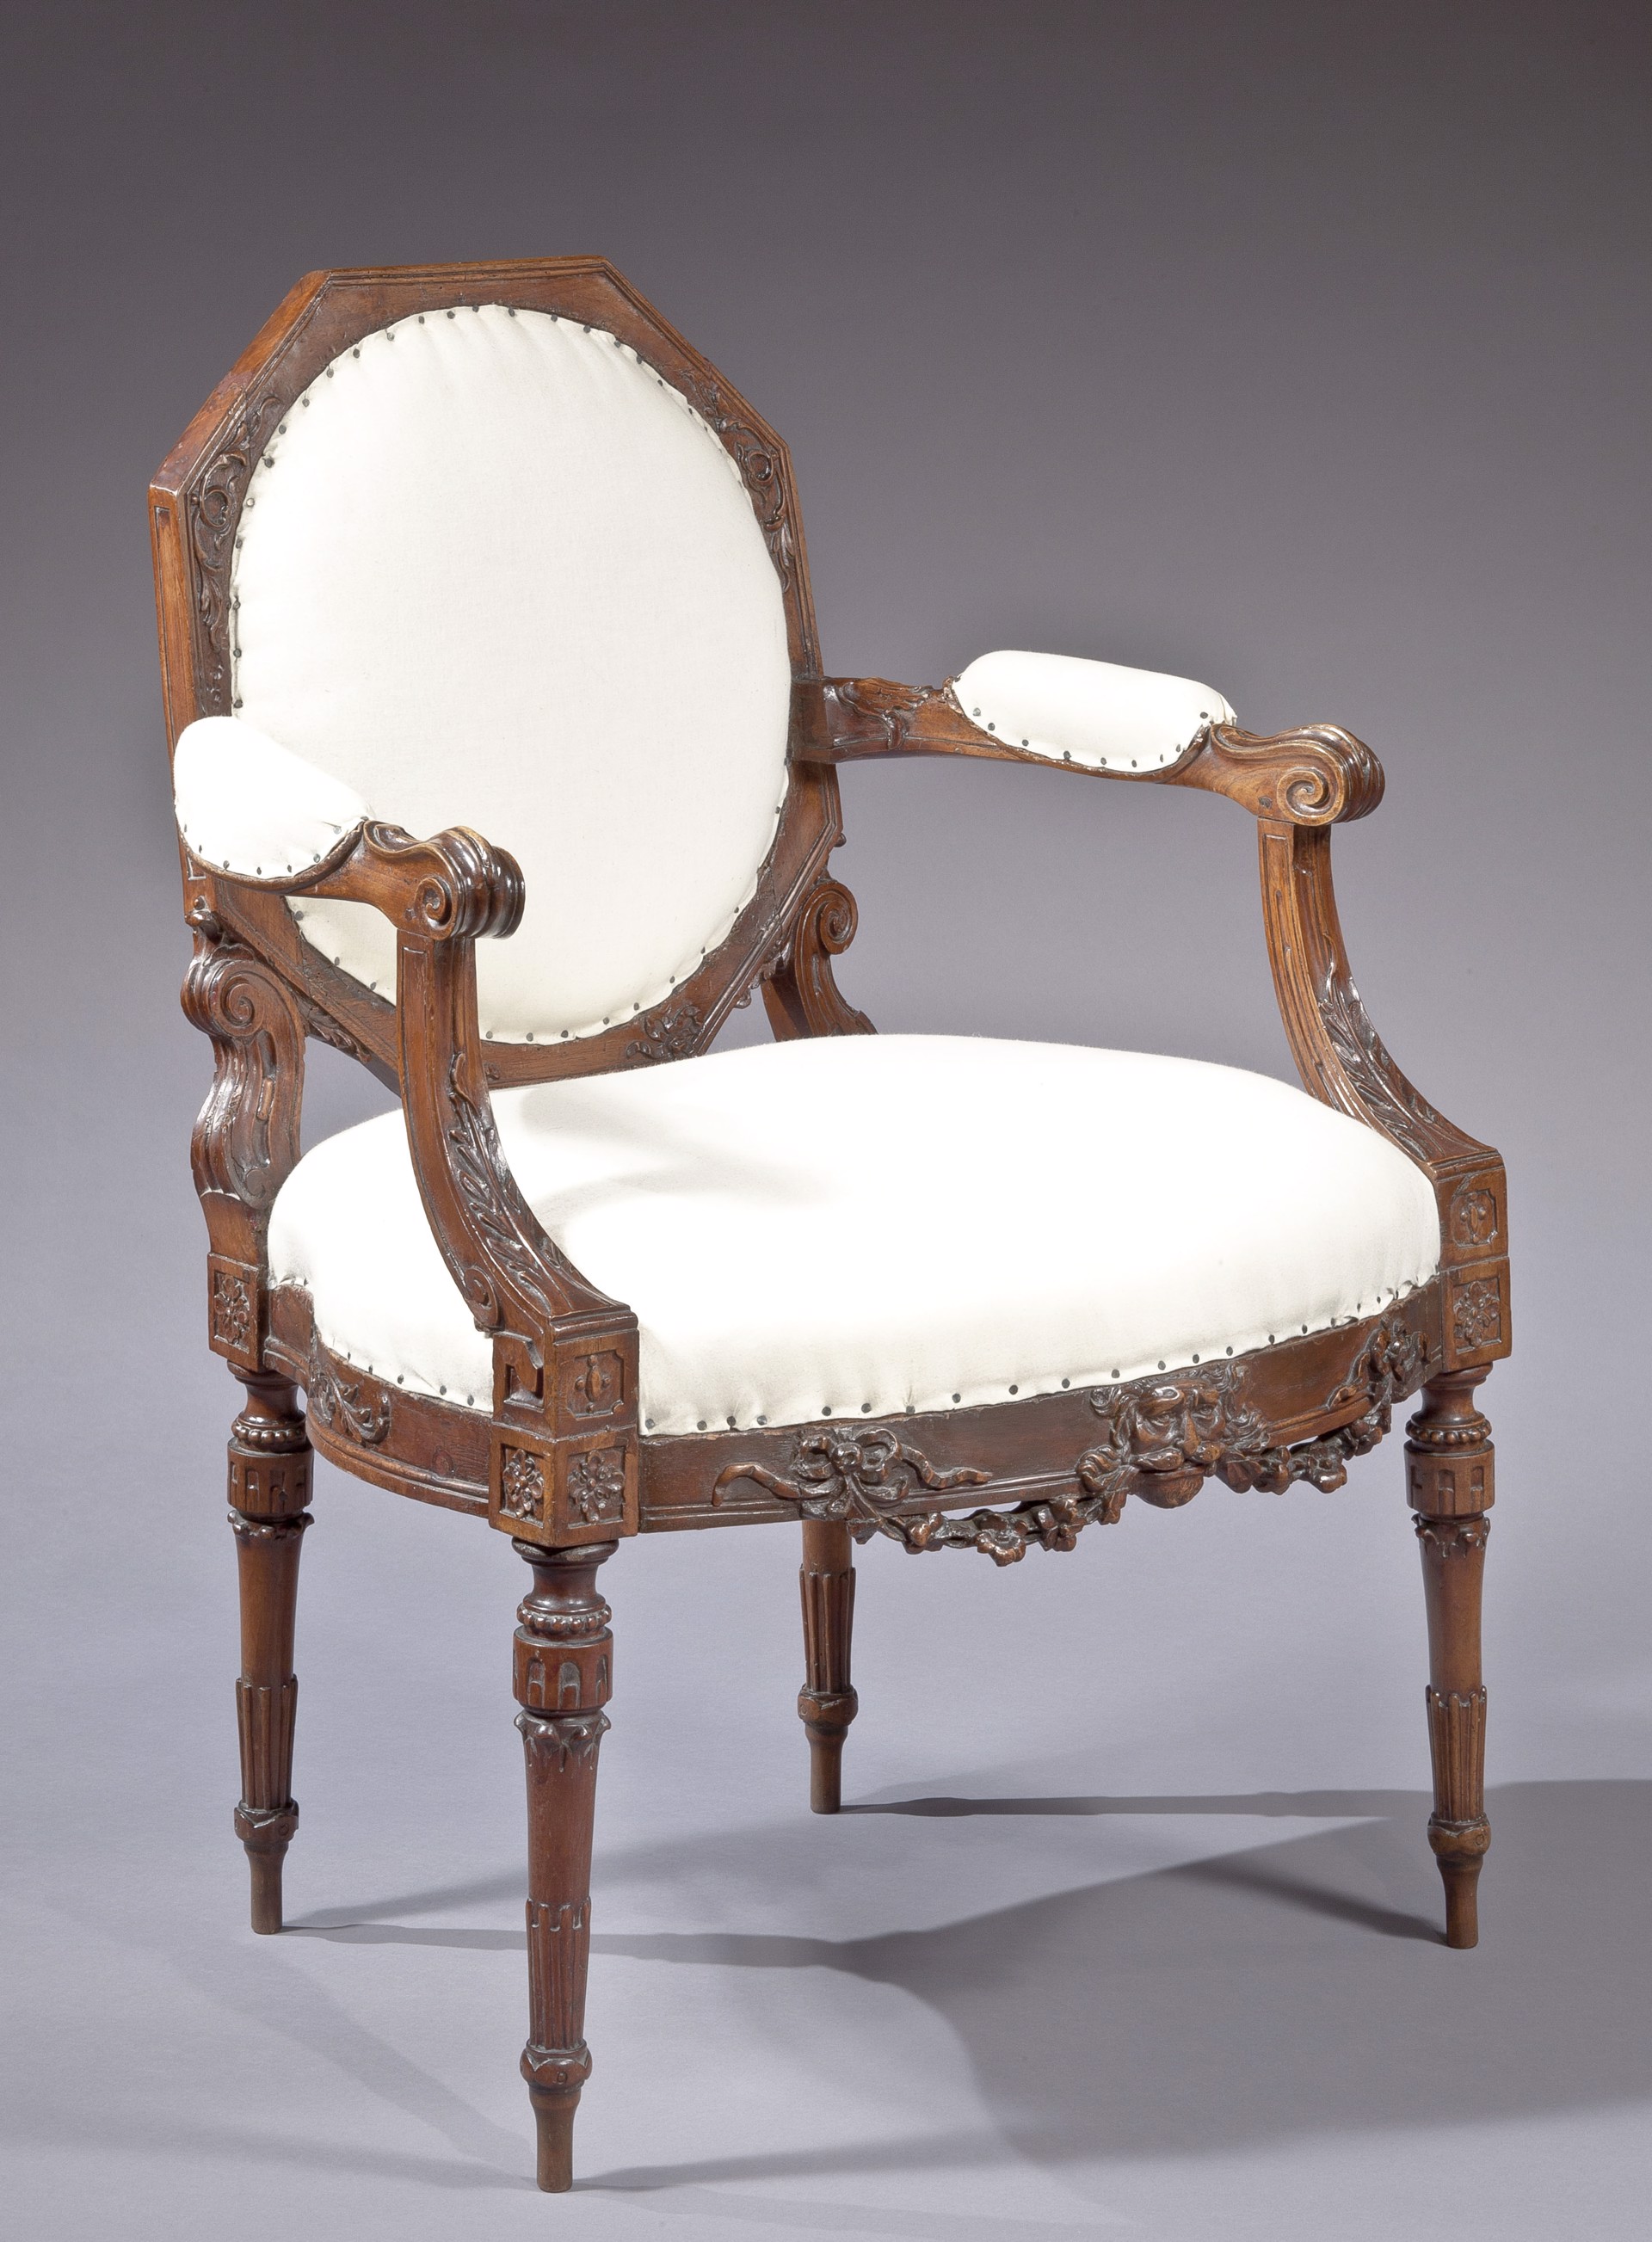 UNUSUAL CONTINENTAL NEOCLASSICAL CARVED MAHOGANY ARMCHAIR